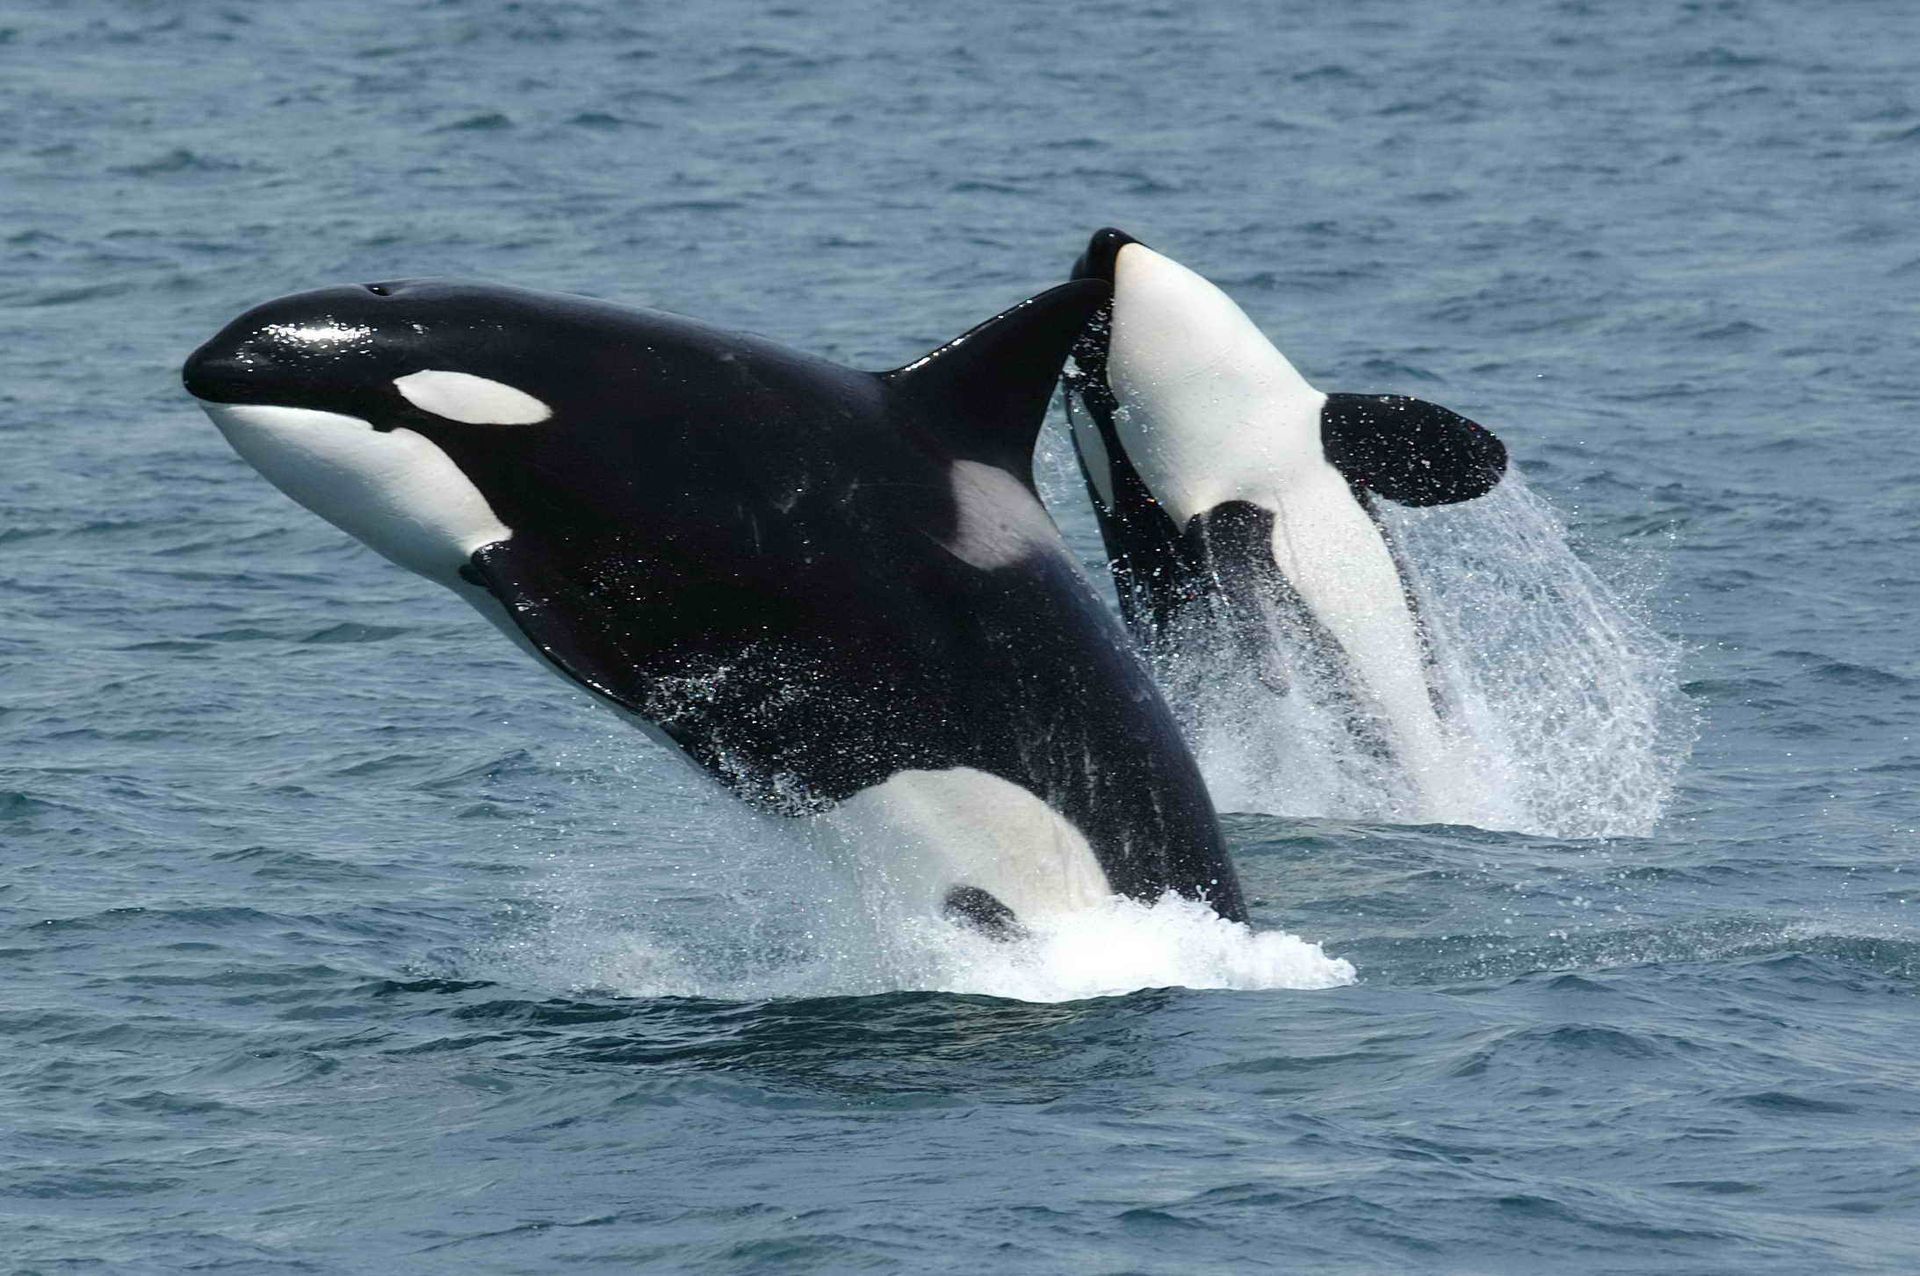 Two killer whales are jumping out of the water